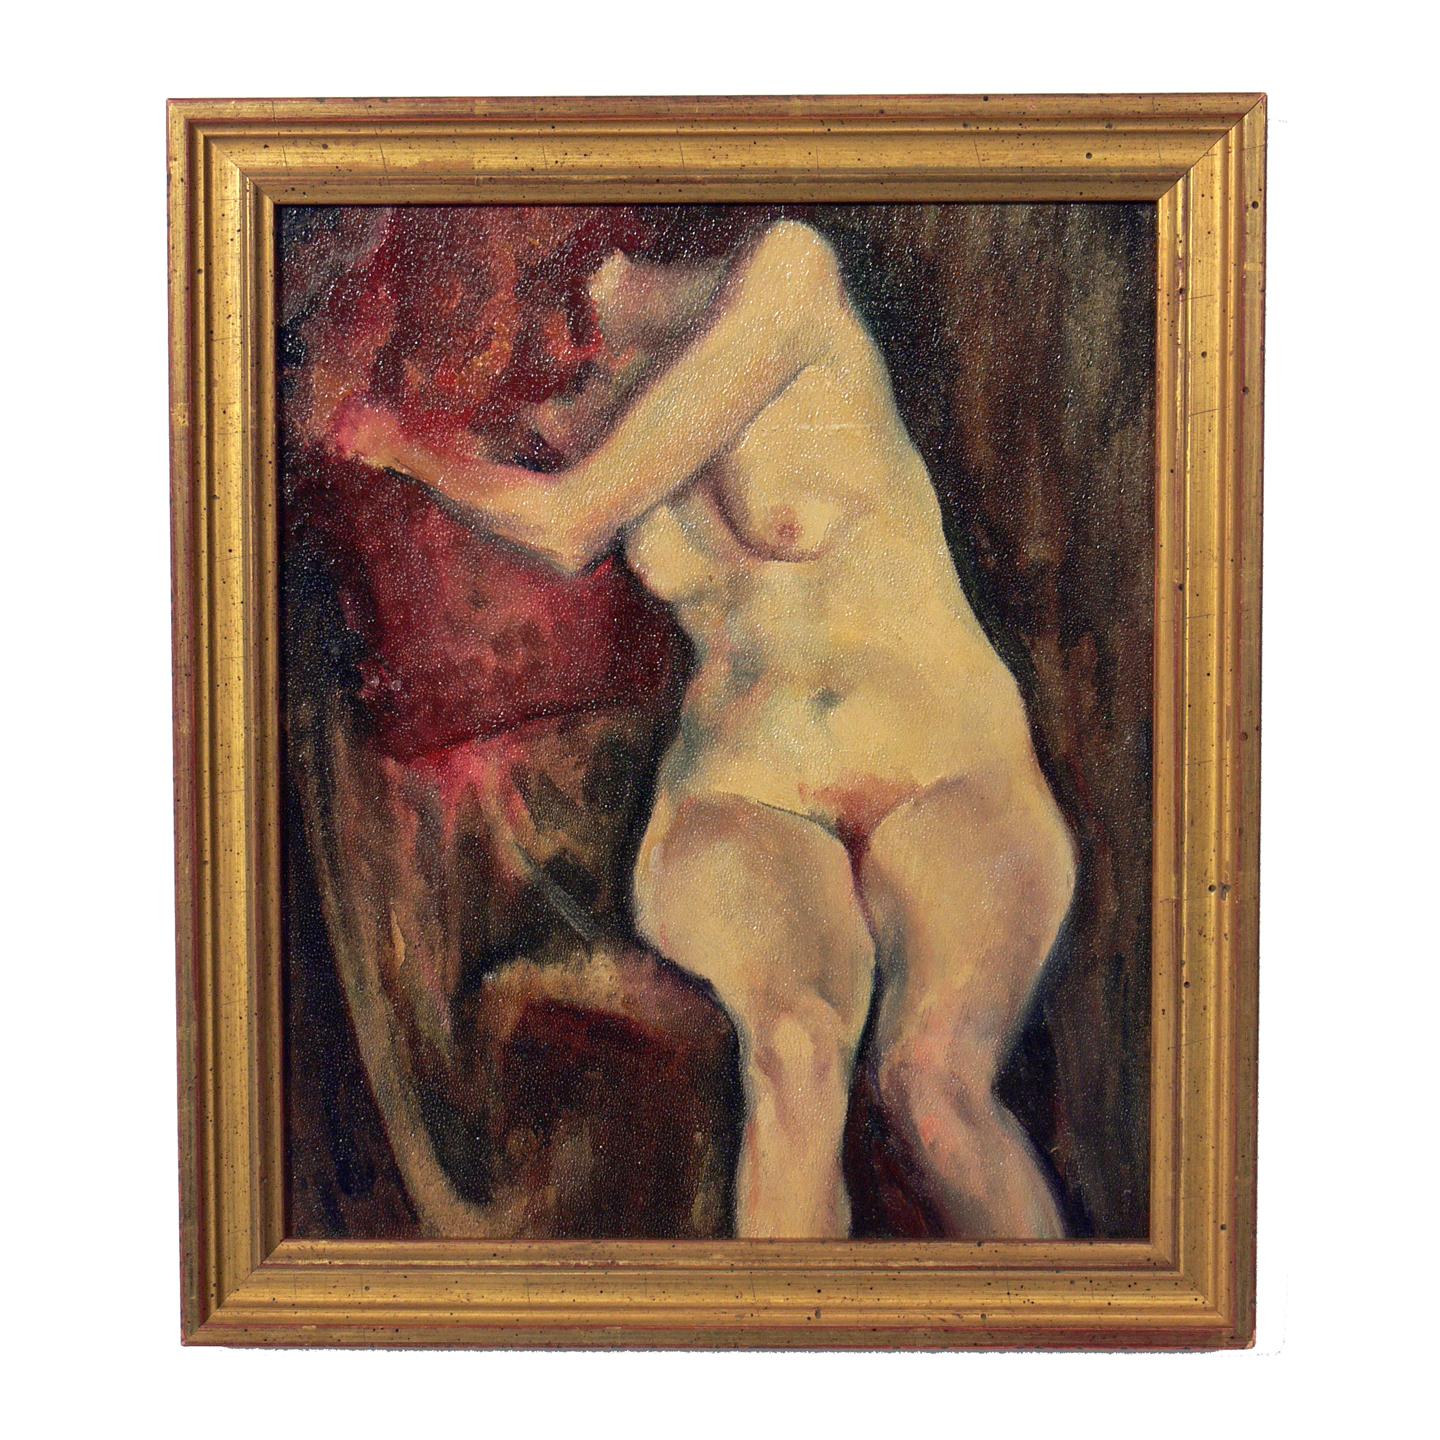 Selection of Modernist or gallery wall, circa 1950s. They have all been framed in vintage gilt frames. They are priced at $650 each. From left to right as seen in the first photo, they are:
1) Original female nude painting, oil on board, artist